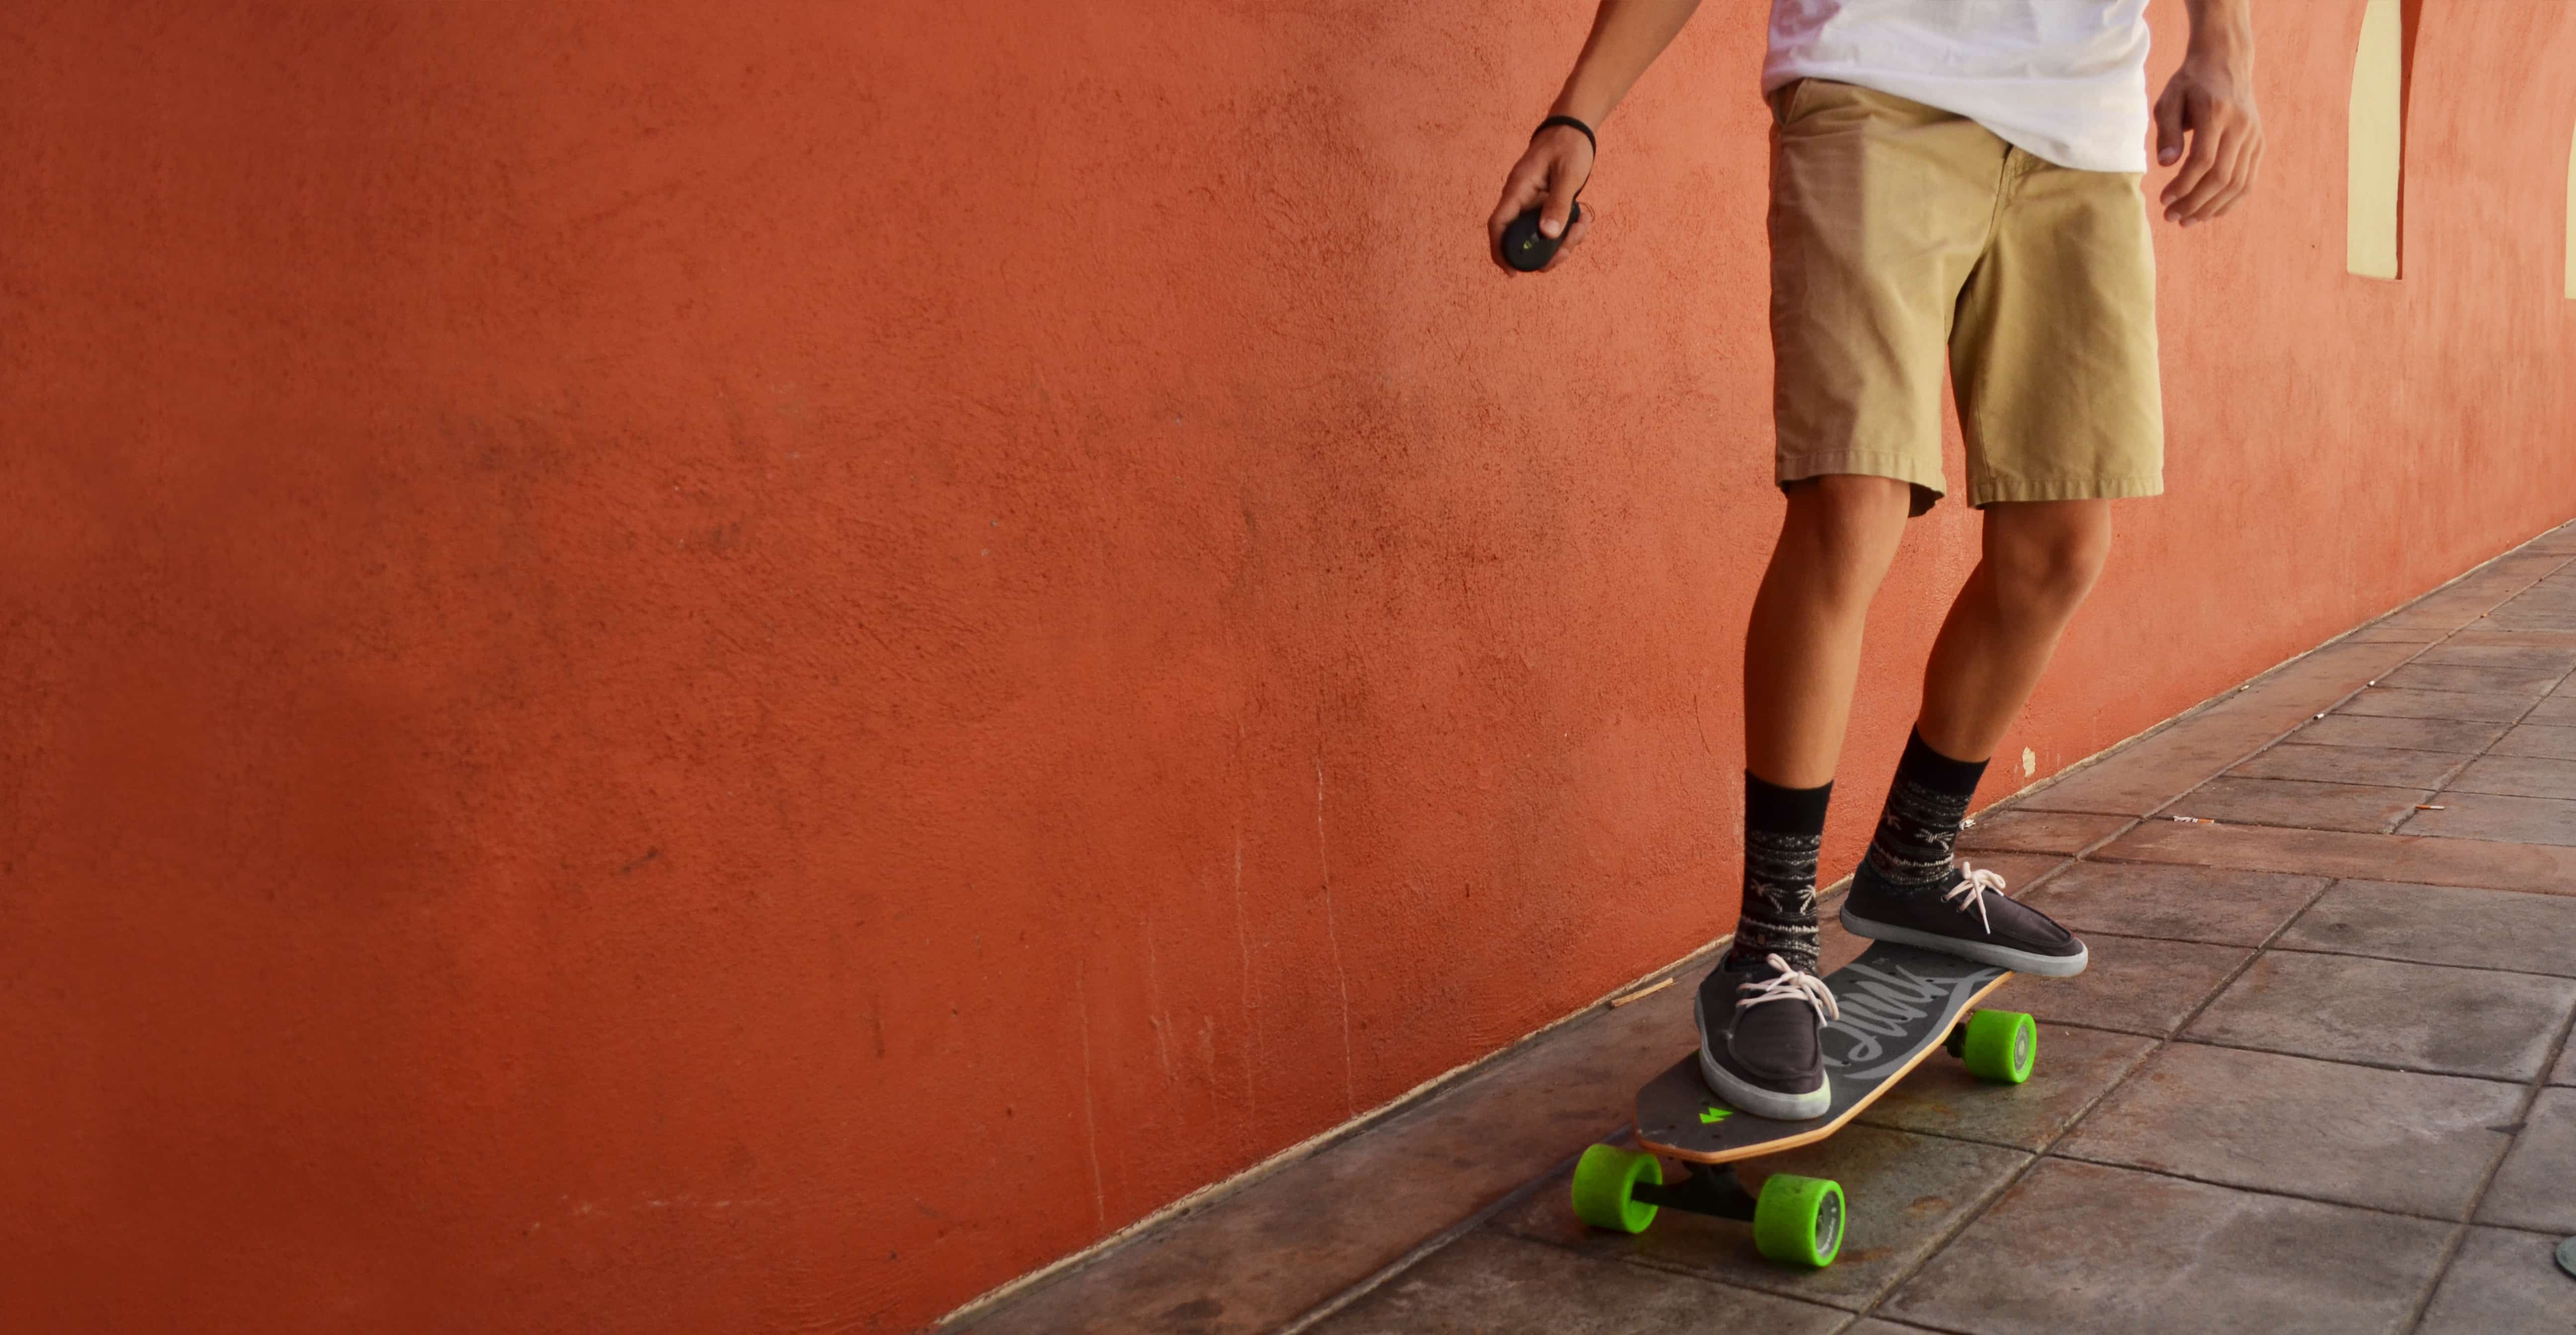 5 Cheaper Alternatives To The Boosted Board Electric Skateboard (2)